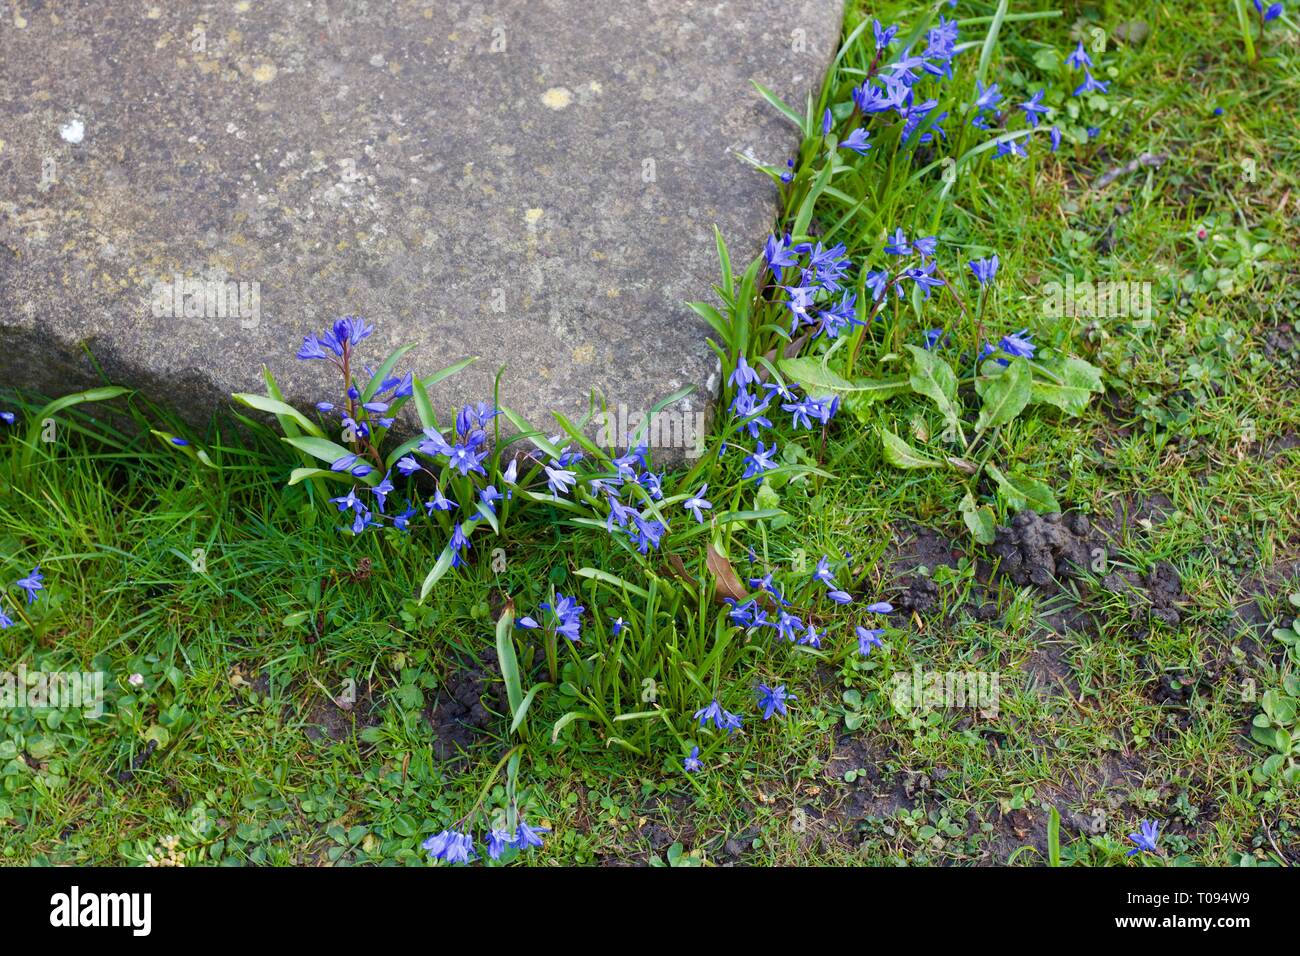 Blue spring flowers surrounding paving slab on lawn Stock Photo